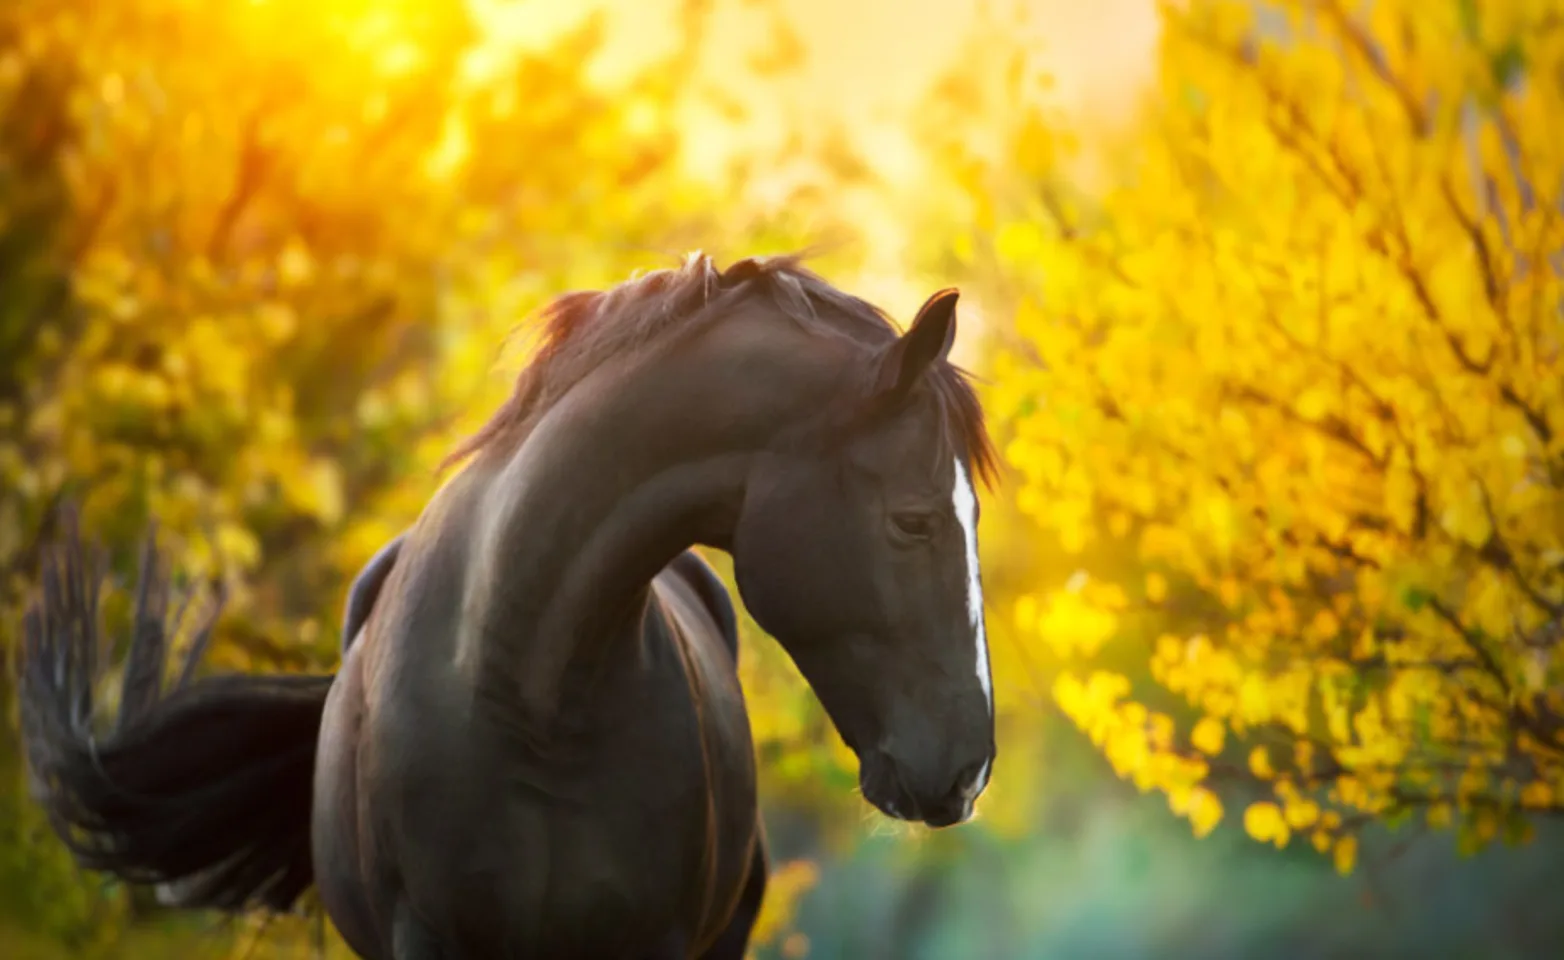 Performance Horse Sunset with Yellow Trees